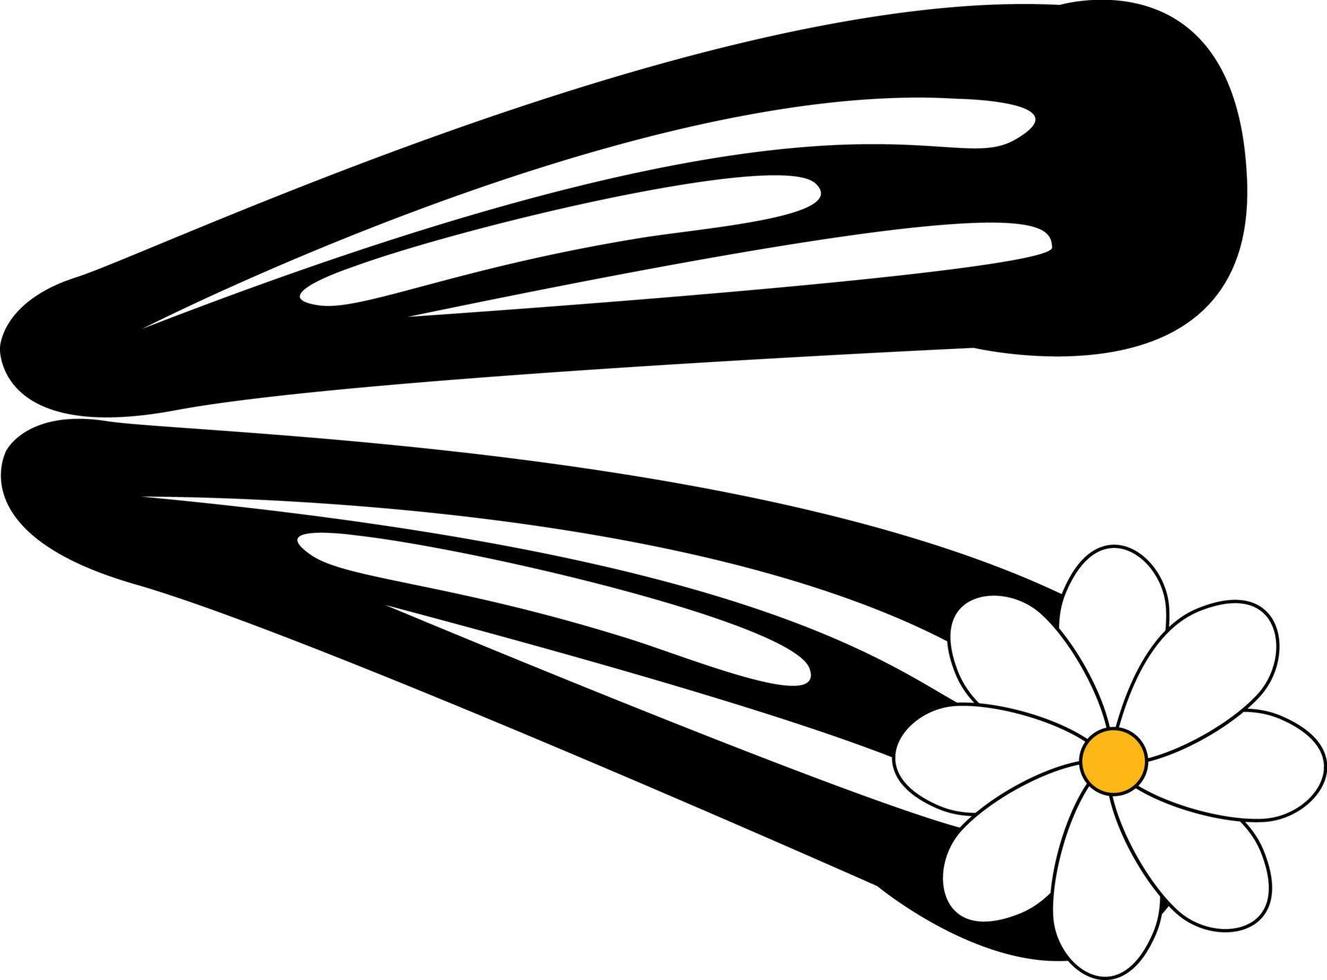 Hairpin with flower, illustration, vector on white background.